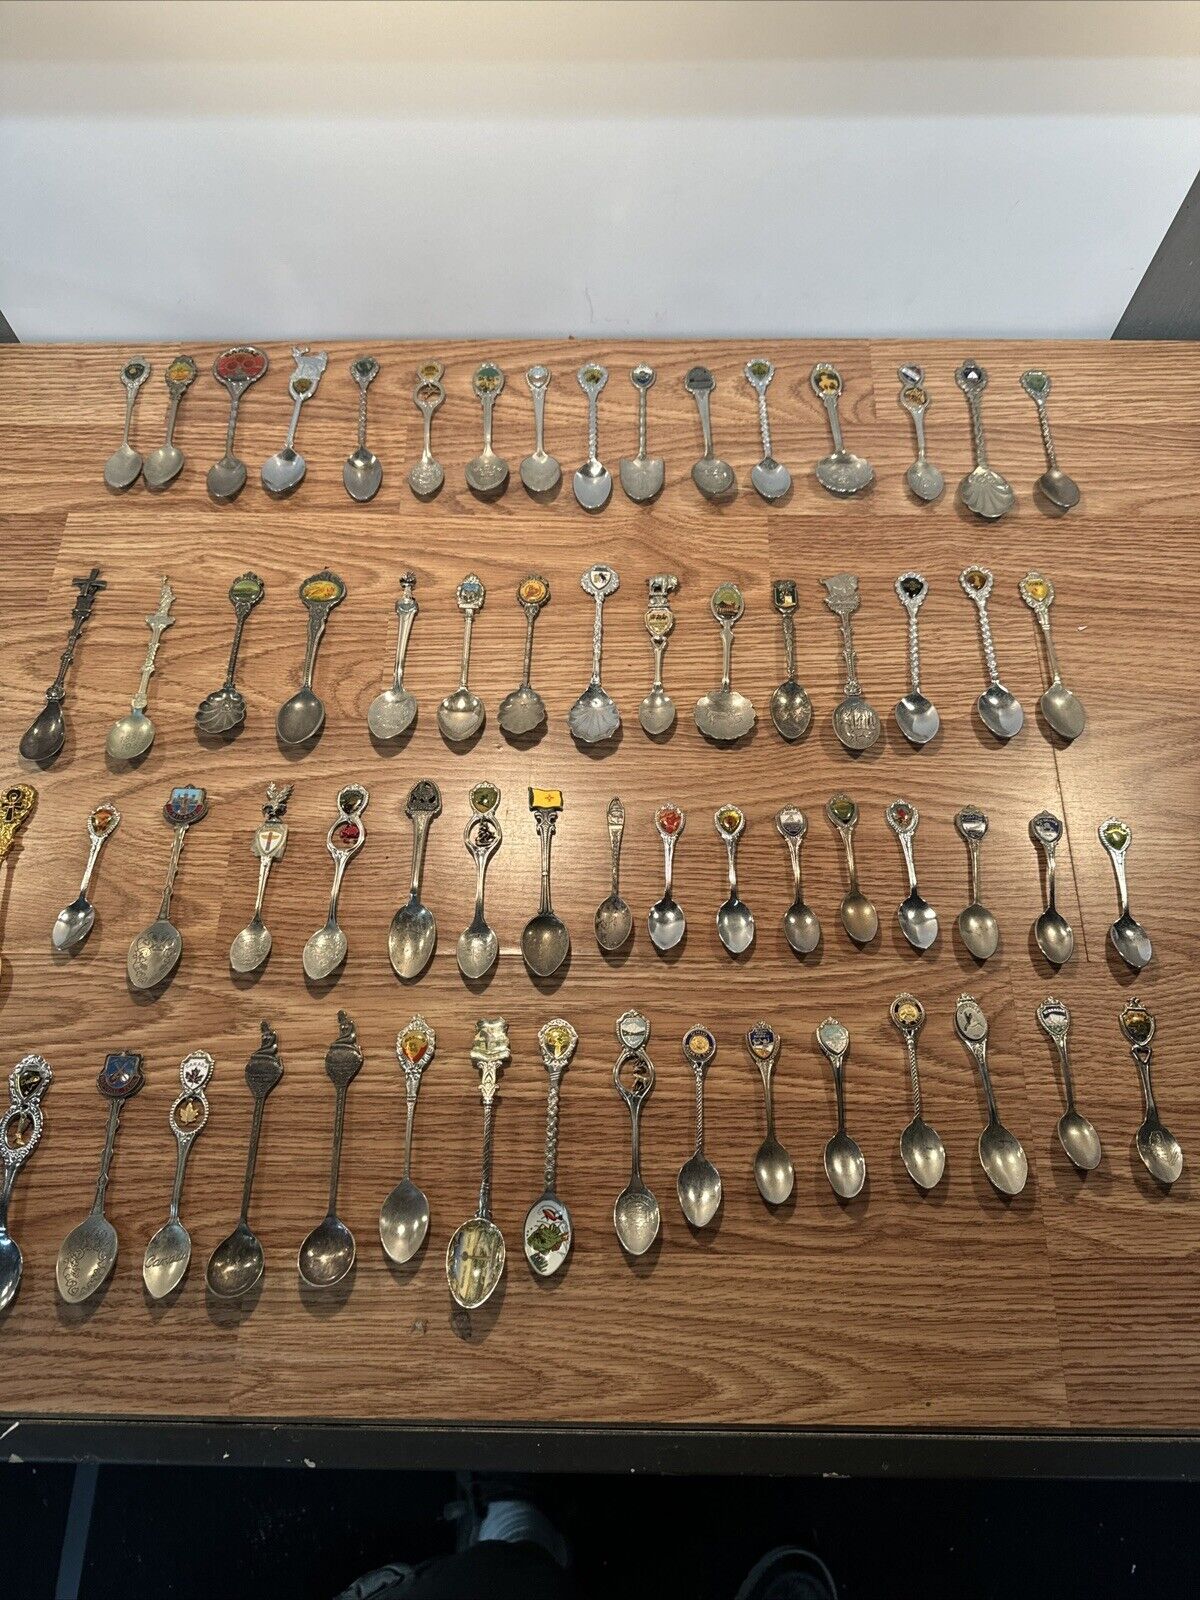 LOT OF 65 SOUVENIR SPOONS, DIFFERENT STATES, COUNTRIES, PLACES, STYLES